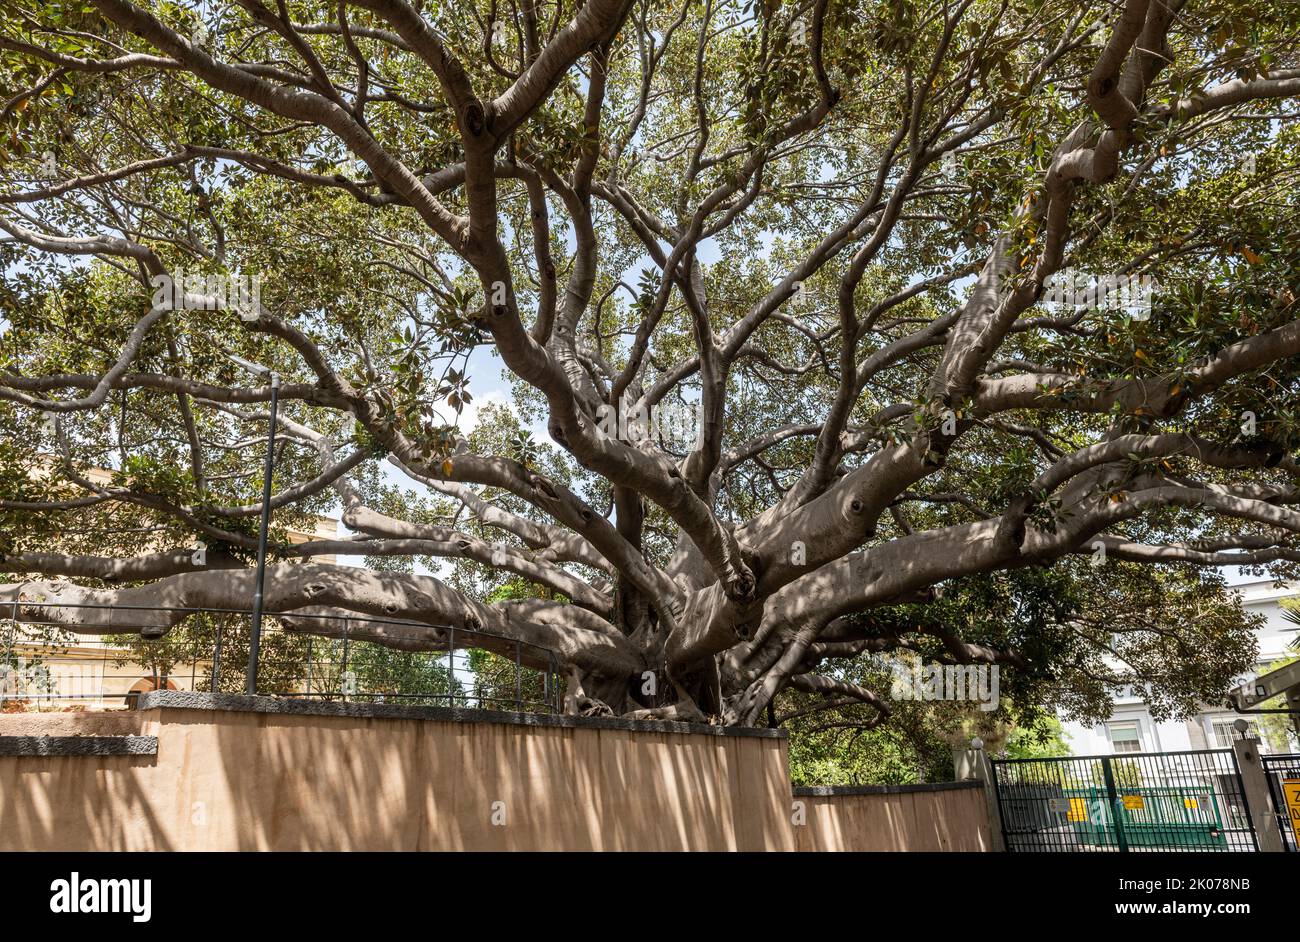 An enormous Moreton Bay Fig tree (Ficus macrophylla) in a school garden in Catania, Sicily, over 12m in girth and 25m high Stock Photo